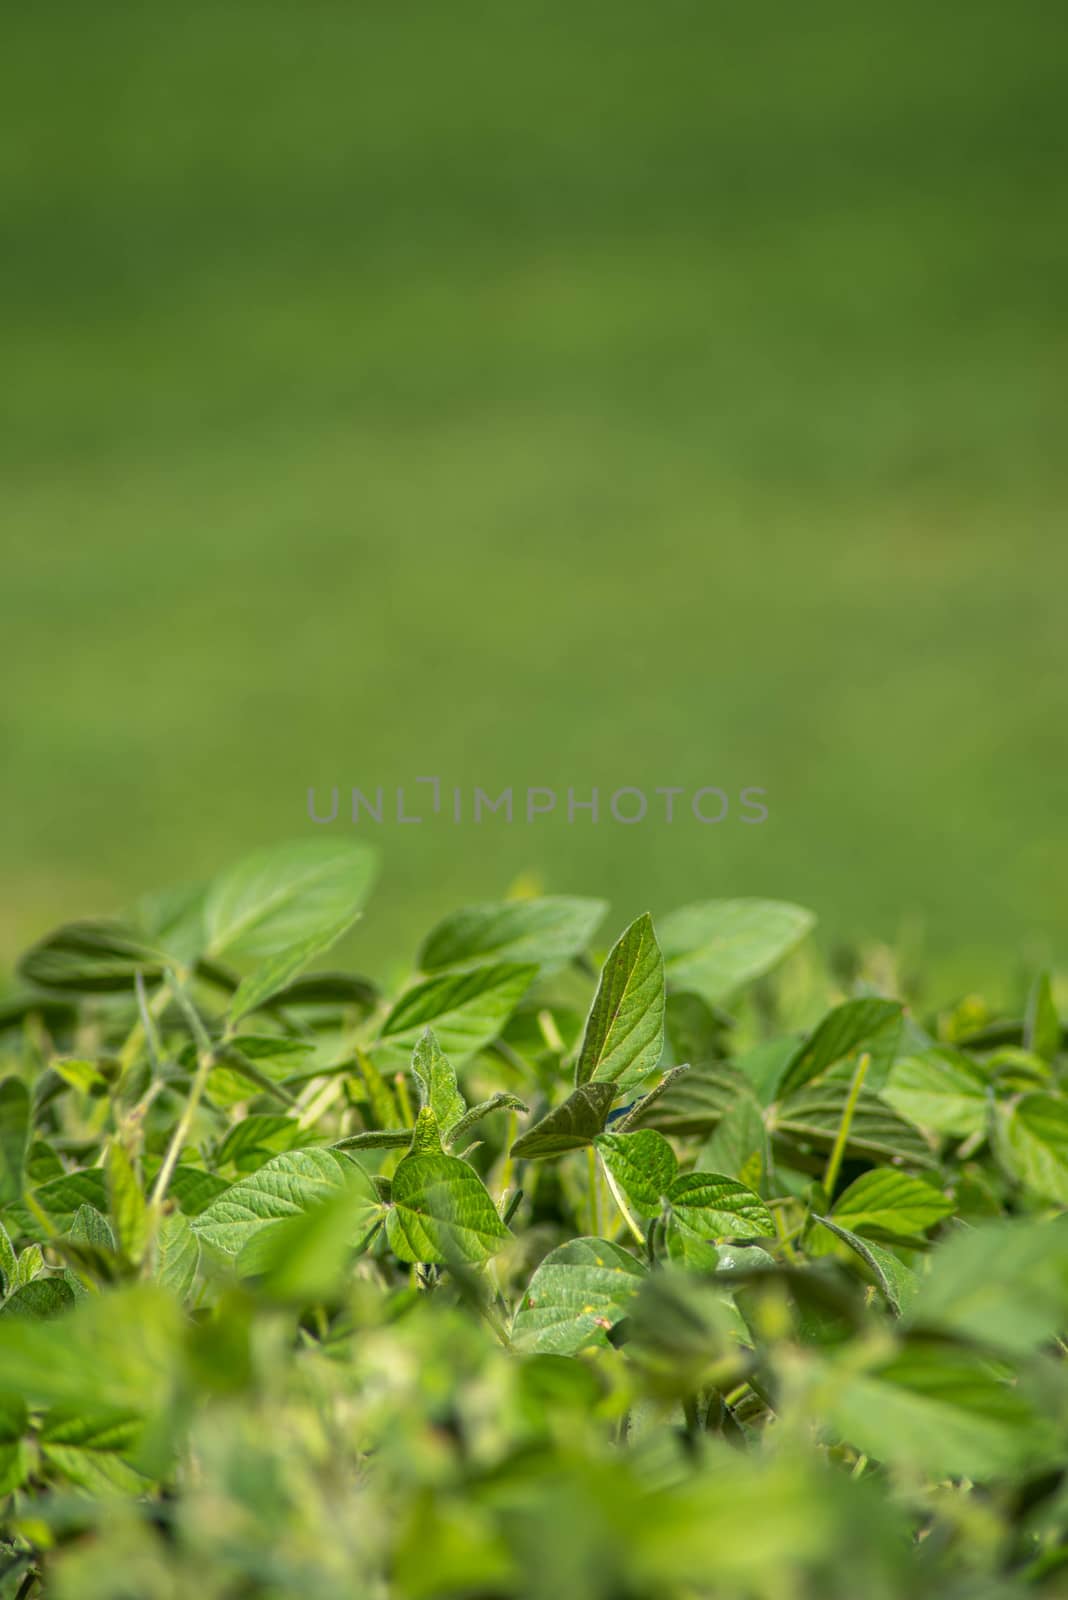 Close up macro of Soybean leaves with vast defocused field behind. Serene green background in natural light with copy space.